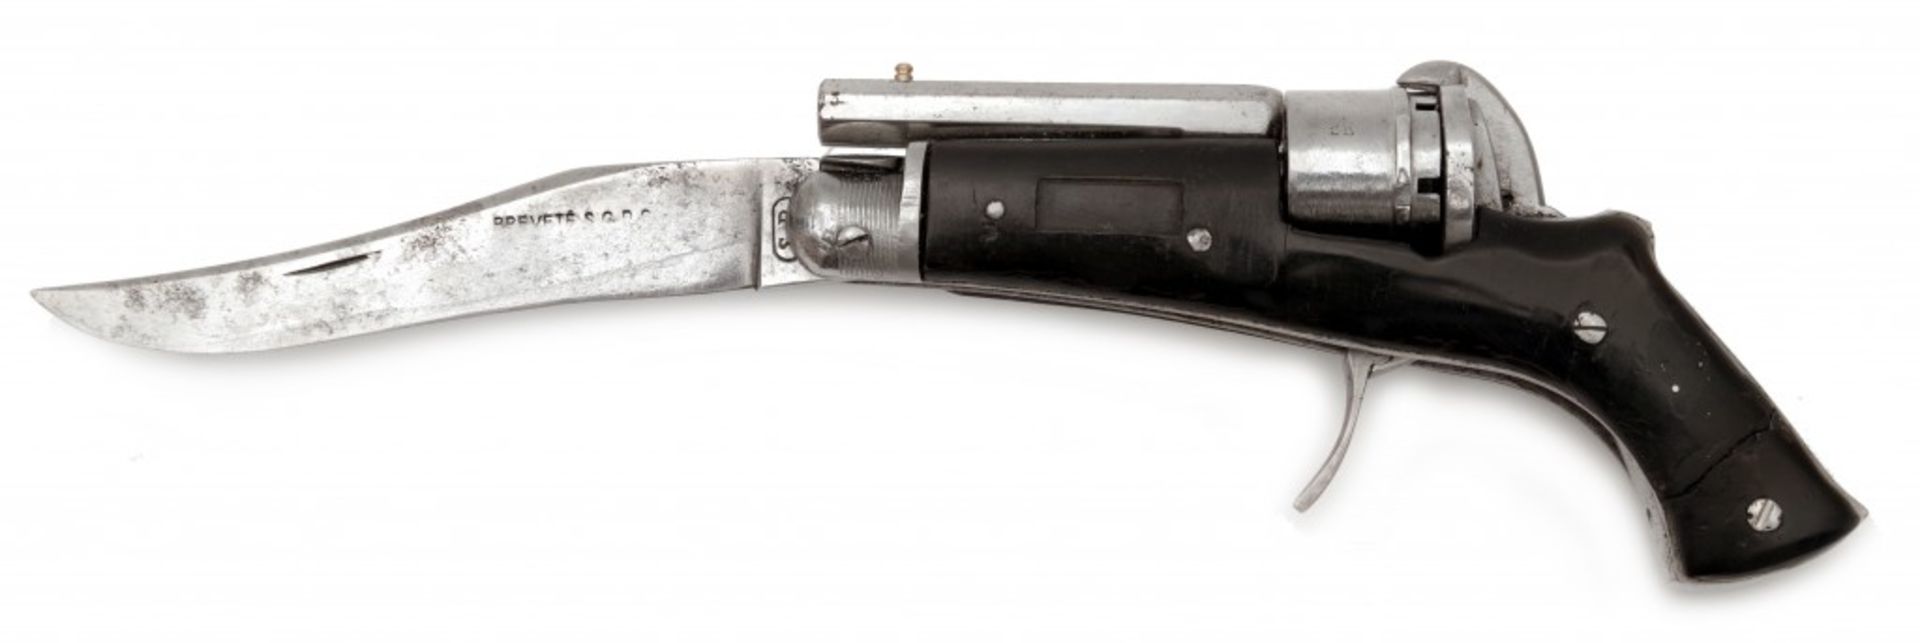 A Pinfire Knife Revolver - Image 2 of 4